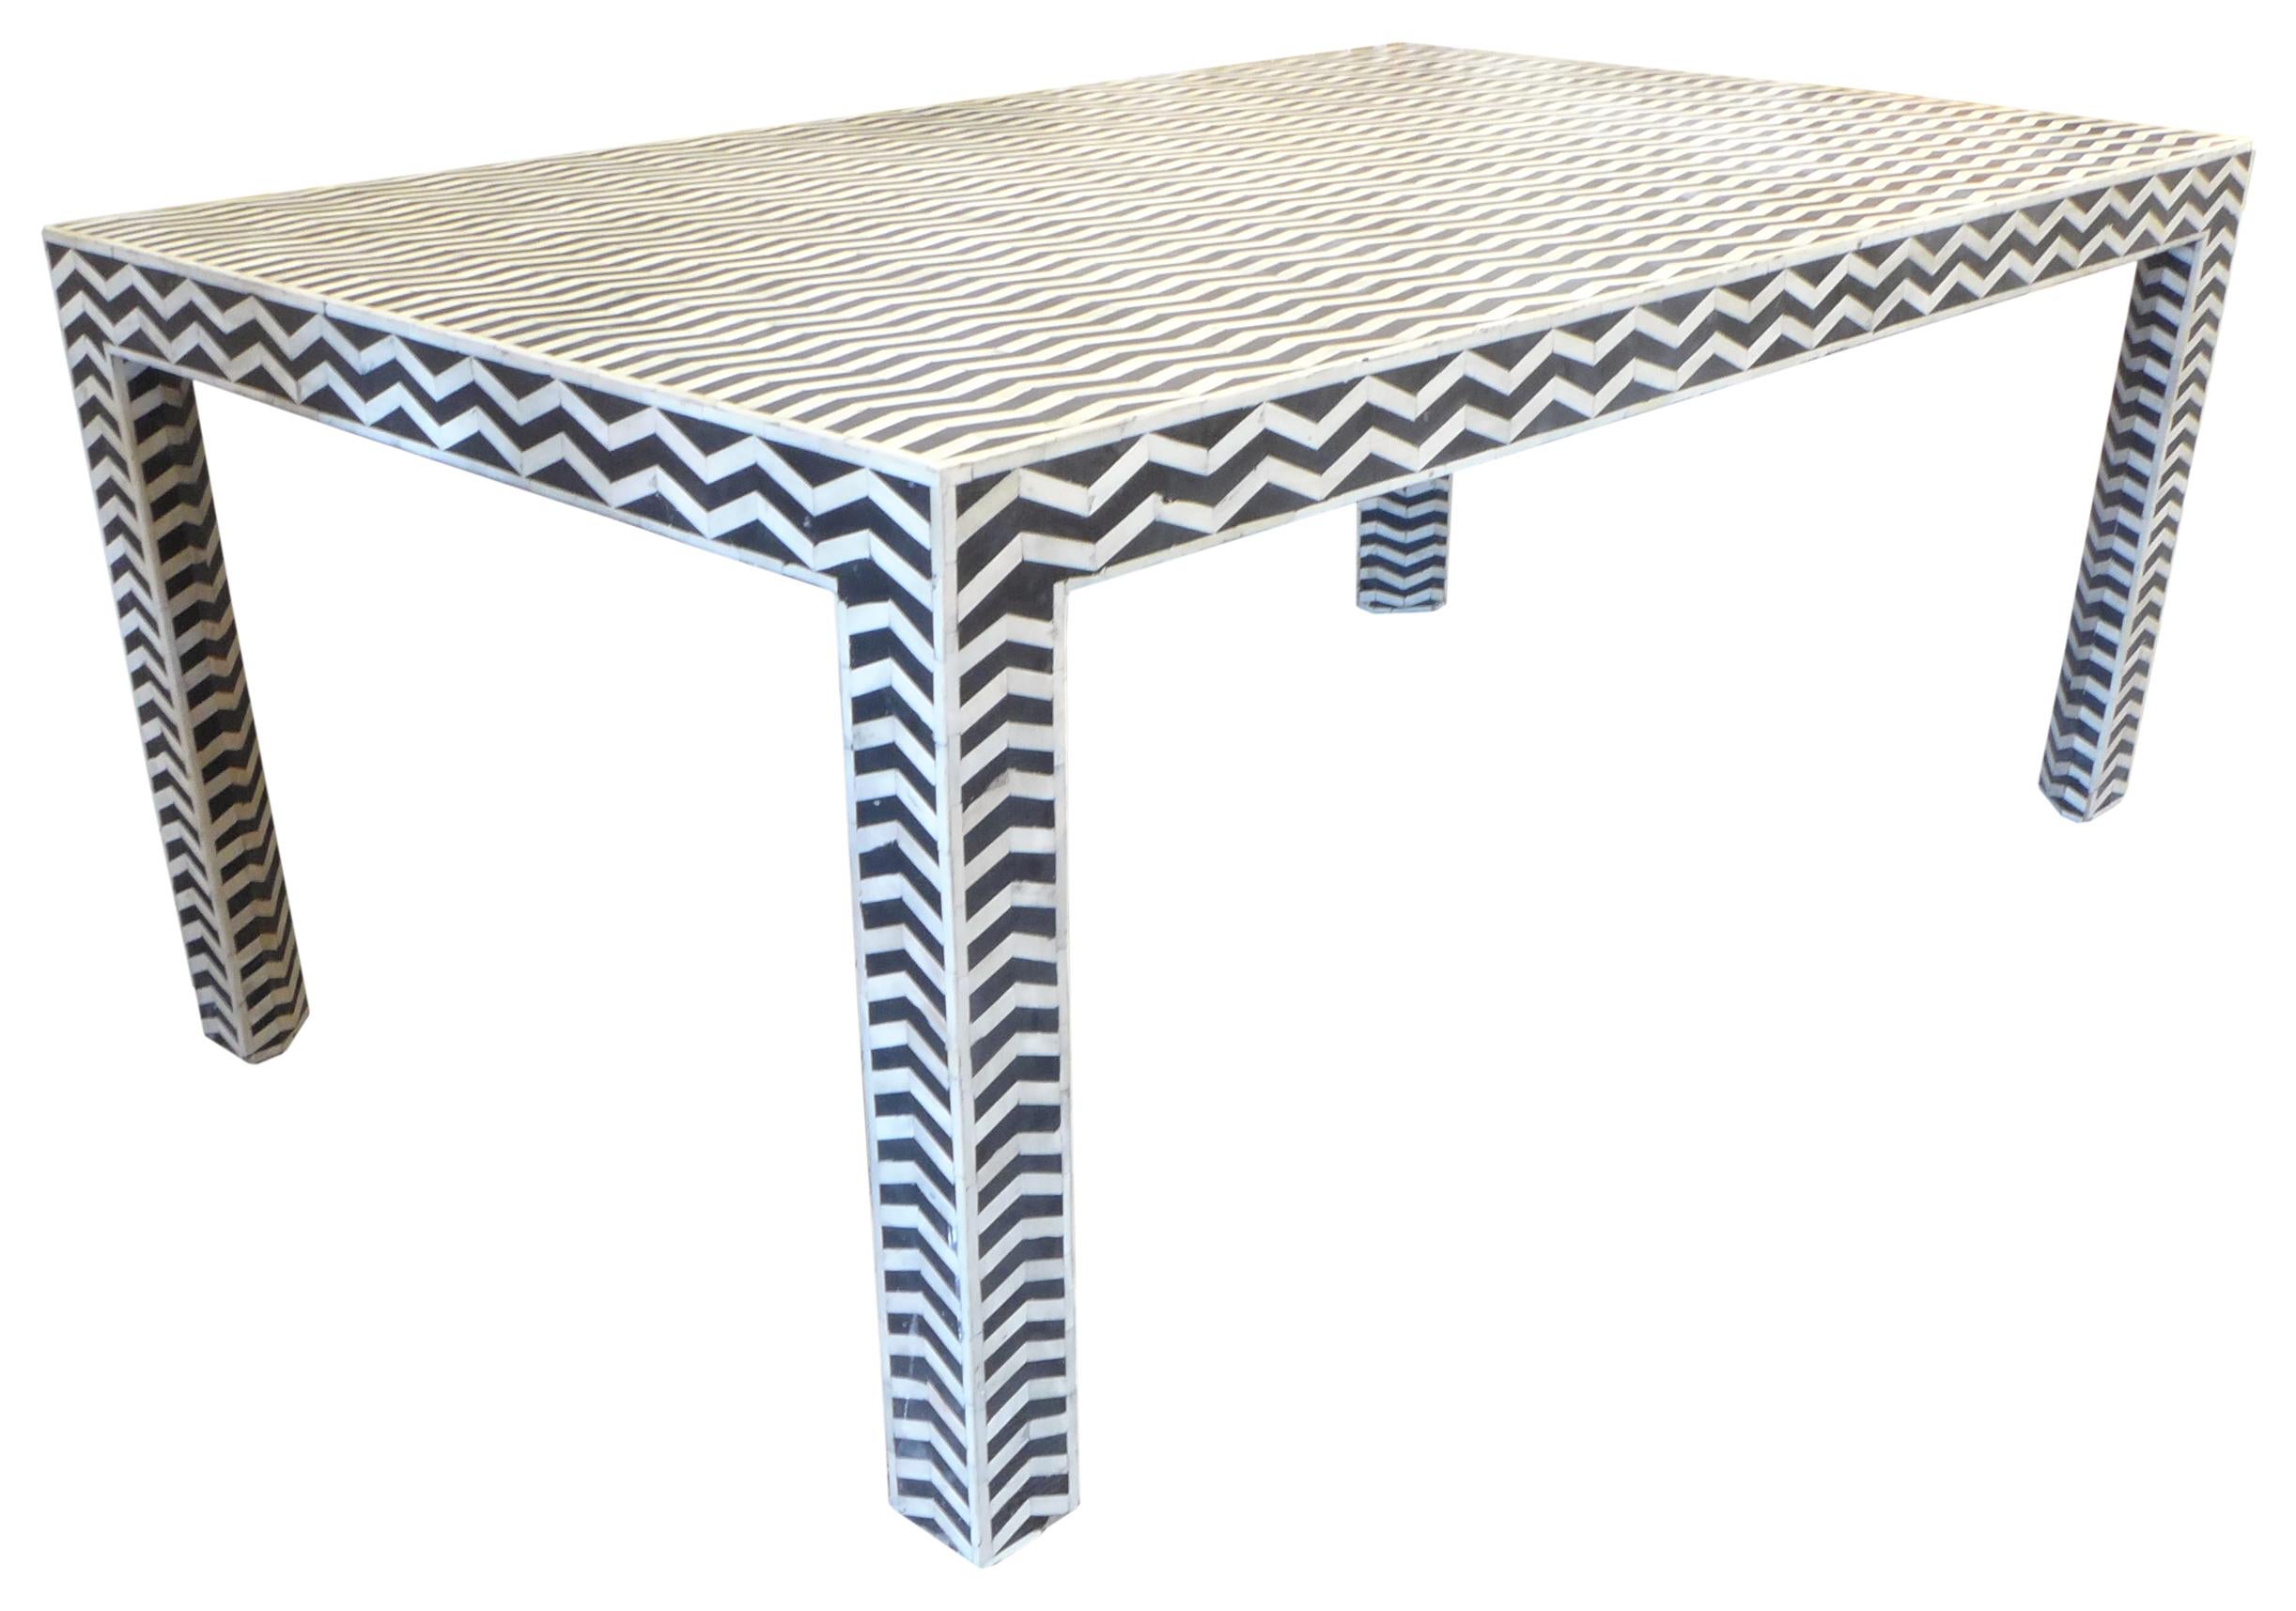 A fantastic faux ebony-and-ivory dining table. A simple, utilitarian wood dining table painstakingly mosaicked in zig-zag-stripe black and white resin. Clear African graphic inspiration and execution. Great patina throughout from age. A